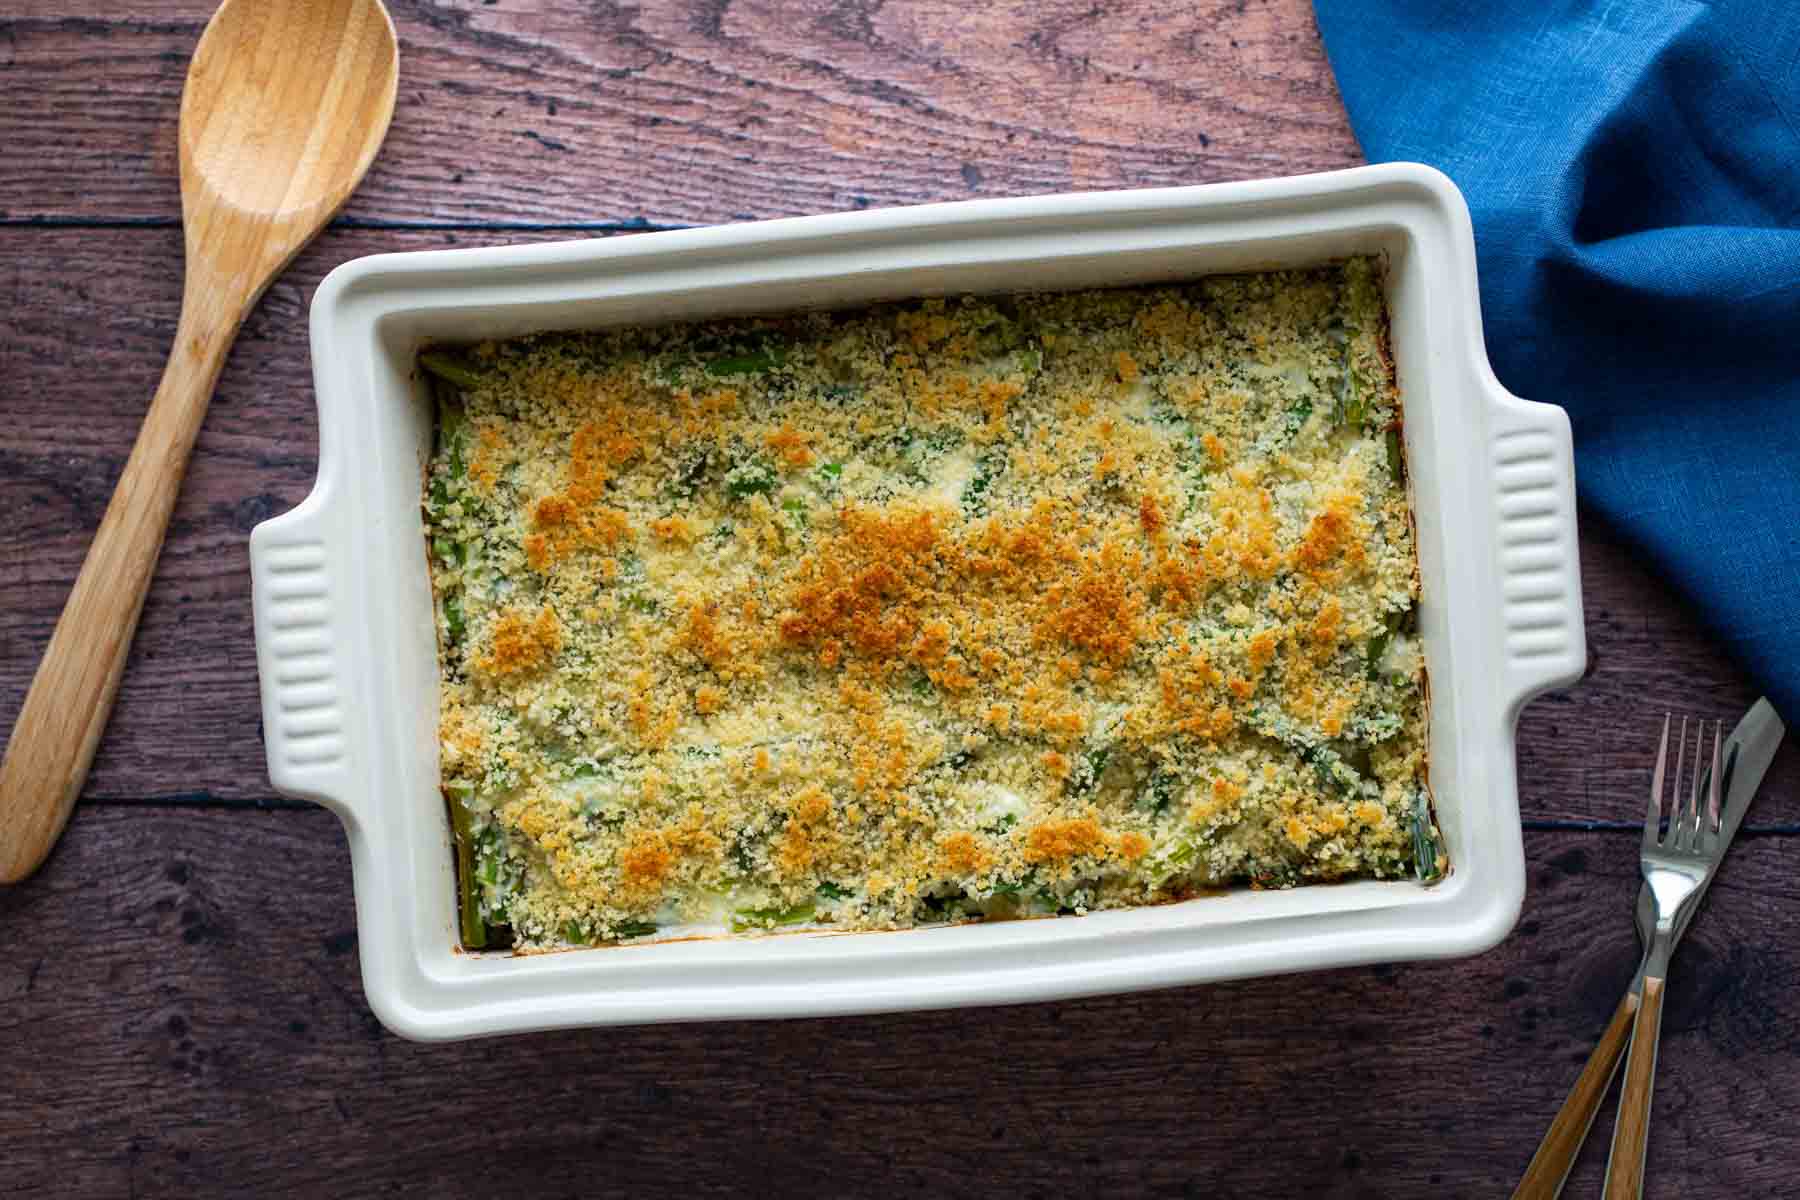 A freshly baked asparagus casserole in a white dish, with a golden breadcrumb topping, accompanied by a wooden spoon and a fork on a wooden table.